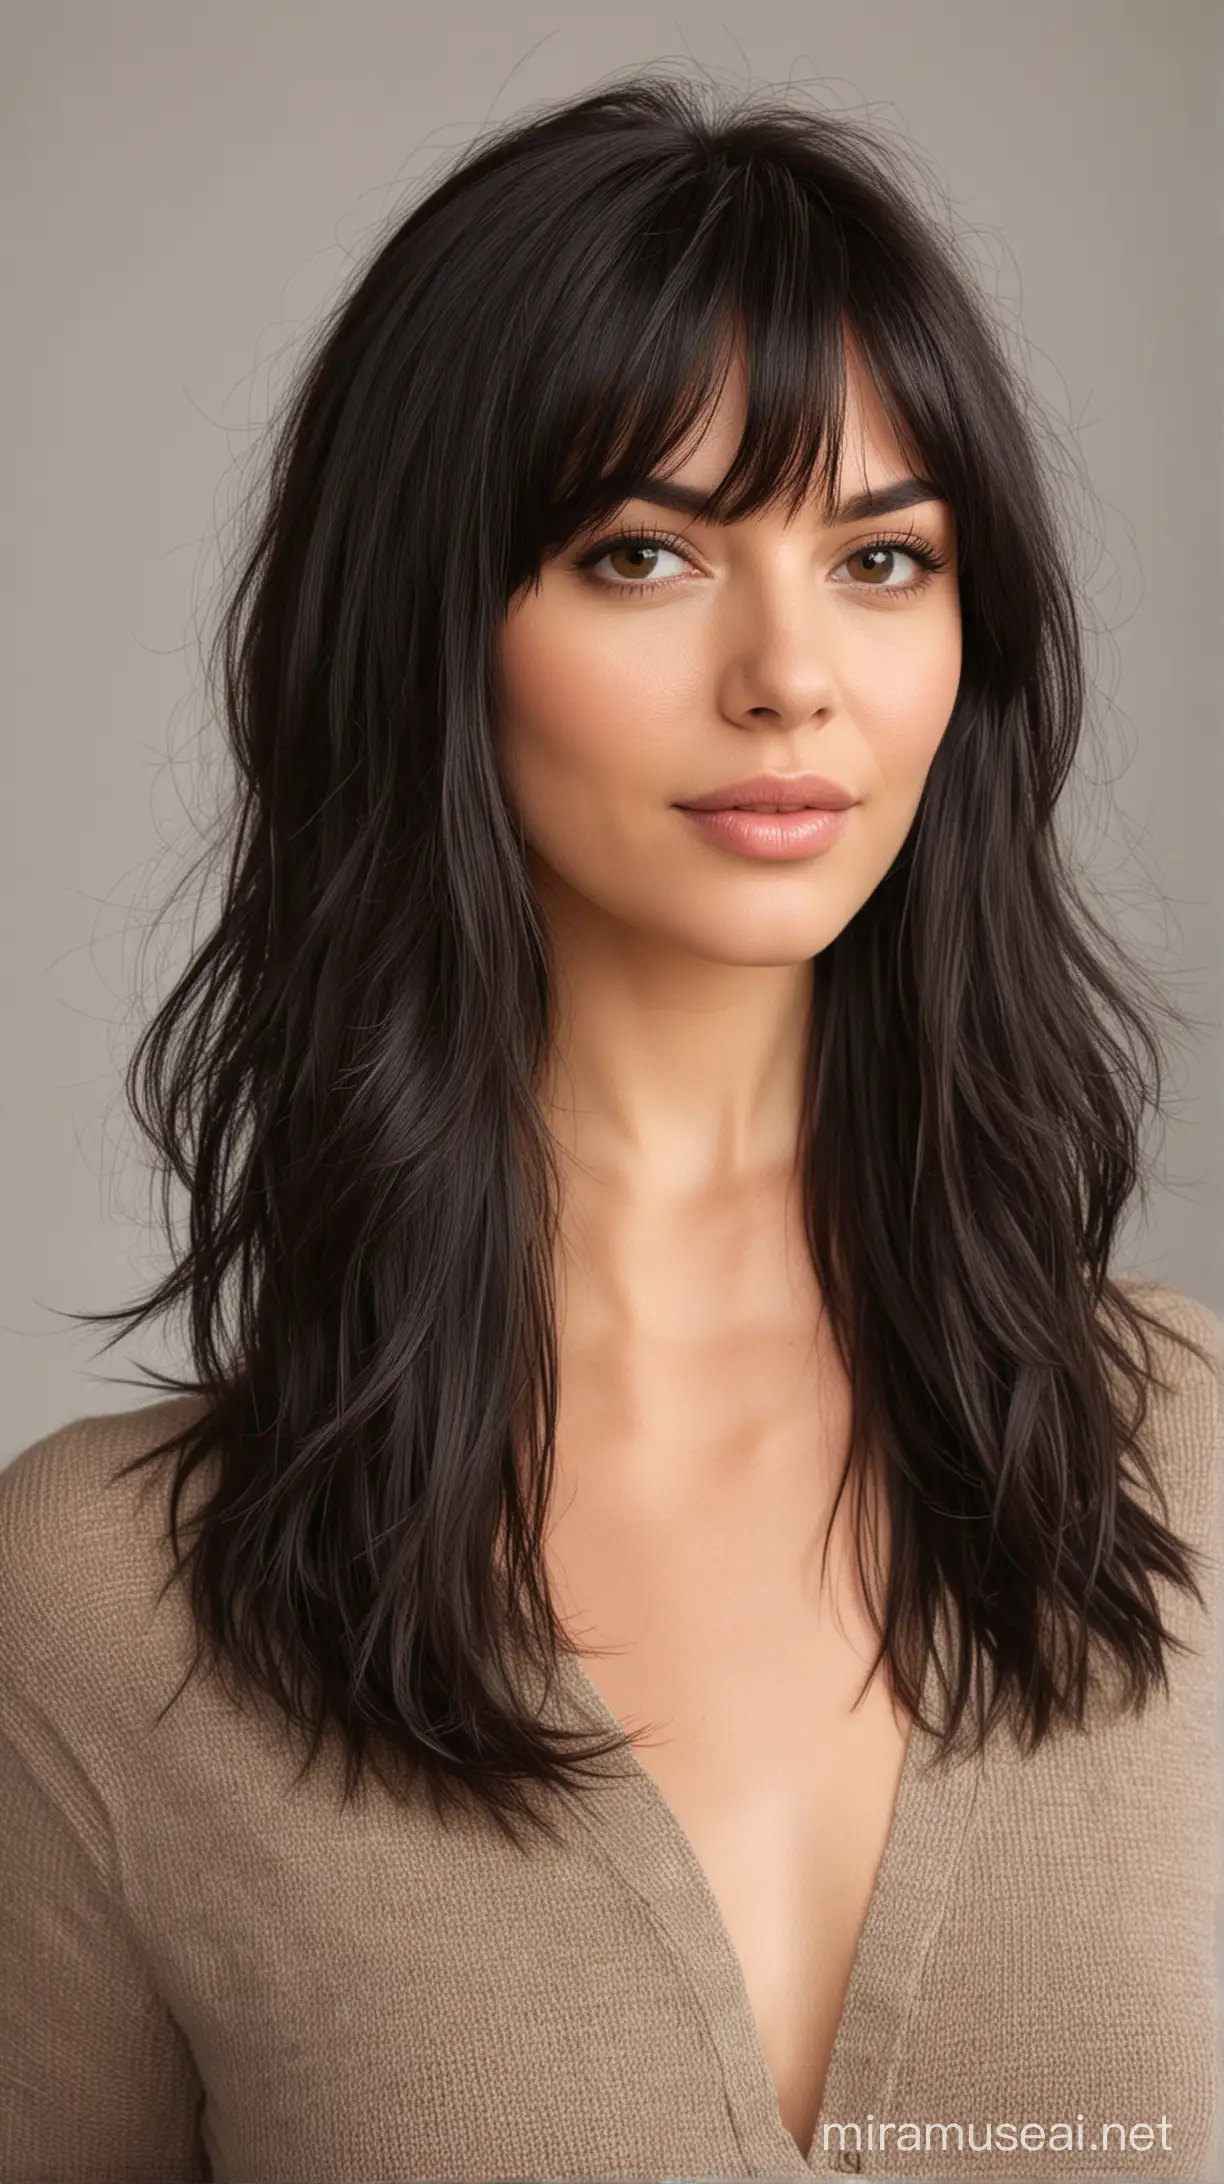 2. Long Shag Haircut with Bangs: A Chic Blend of Drama and Softness
Next time you sit in my chair, I’m eager to try the long shag haircut with bangs on you. It’s perfect for anyone looking to frame their face beautifully, adding a soft yet impactful look. This style pairs beautifully with rich brunette or jet black hair and is ideal for a medium or oval face shape. Imagine rocking this look at a chic café, adding a touch of casual sophistication to your weekend wear.